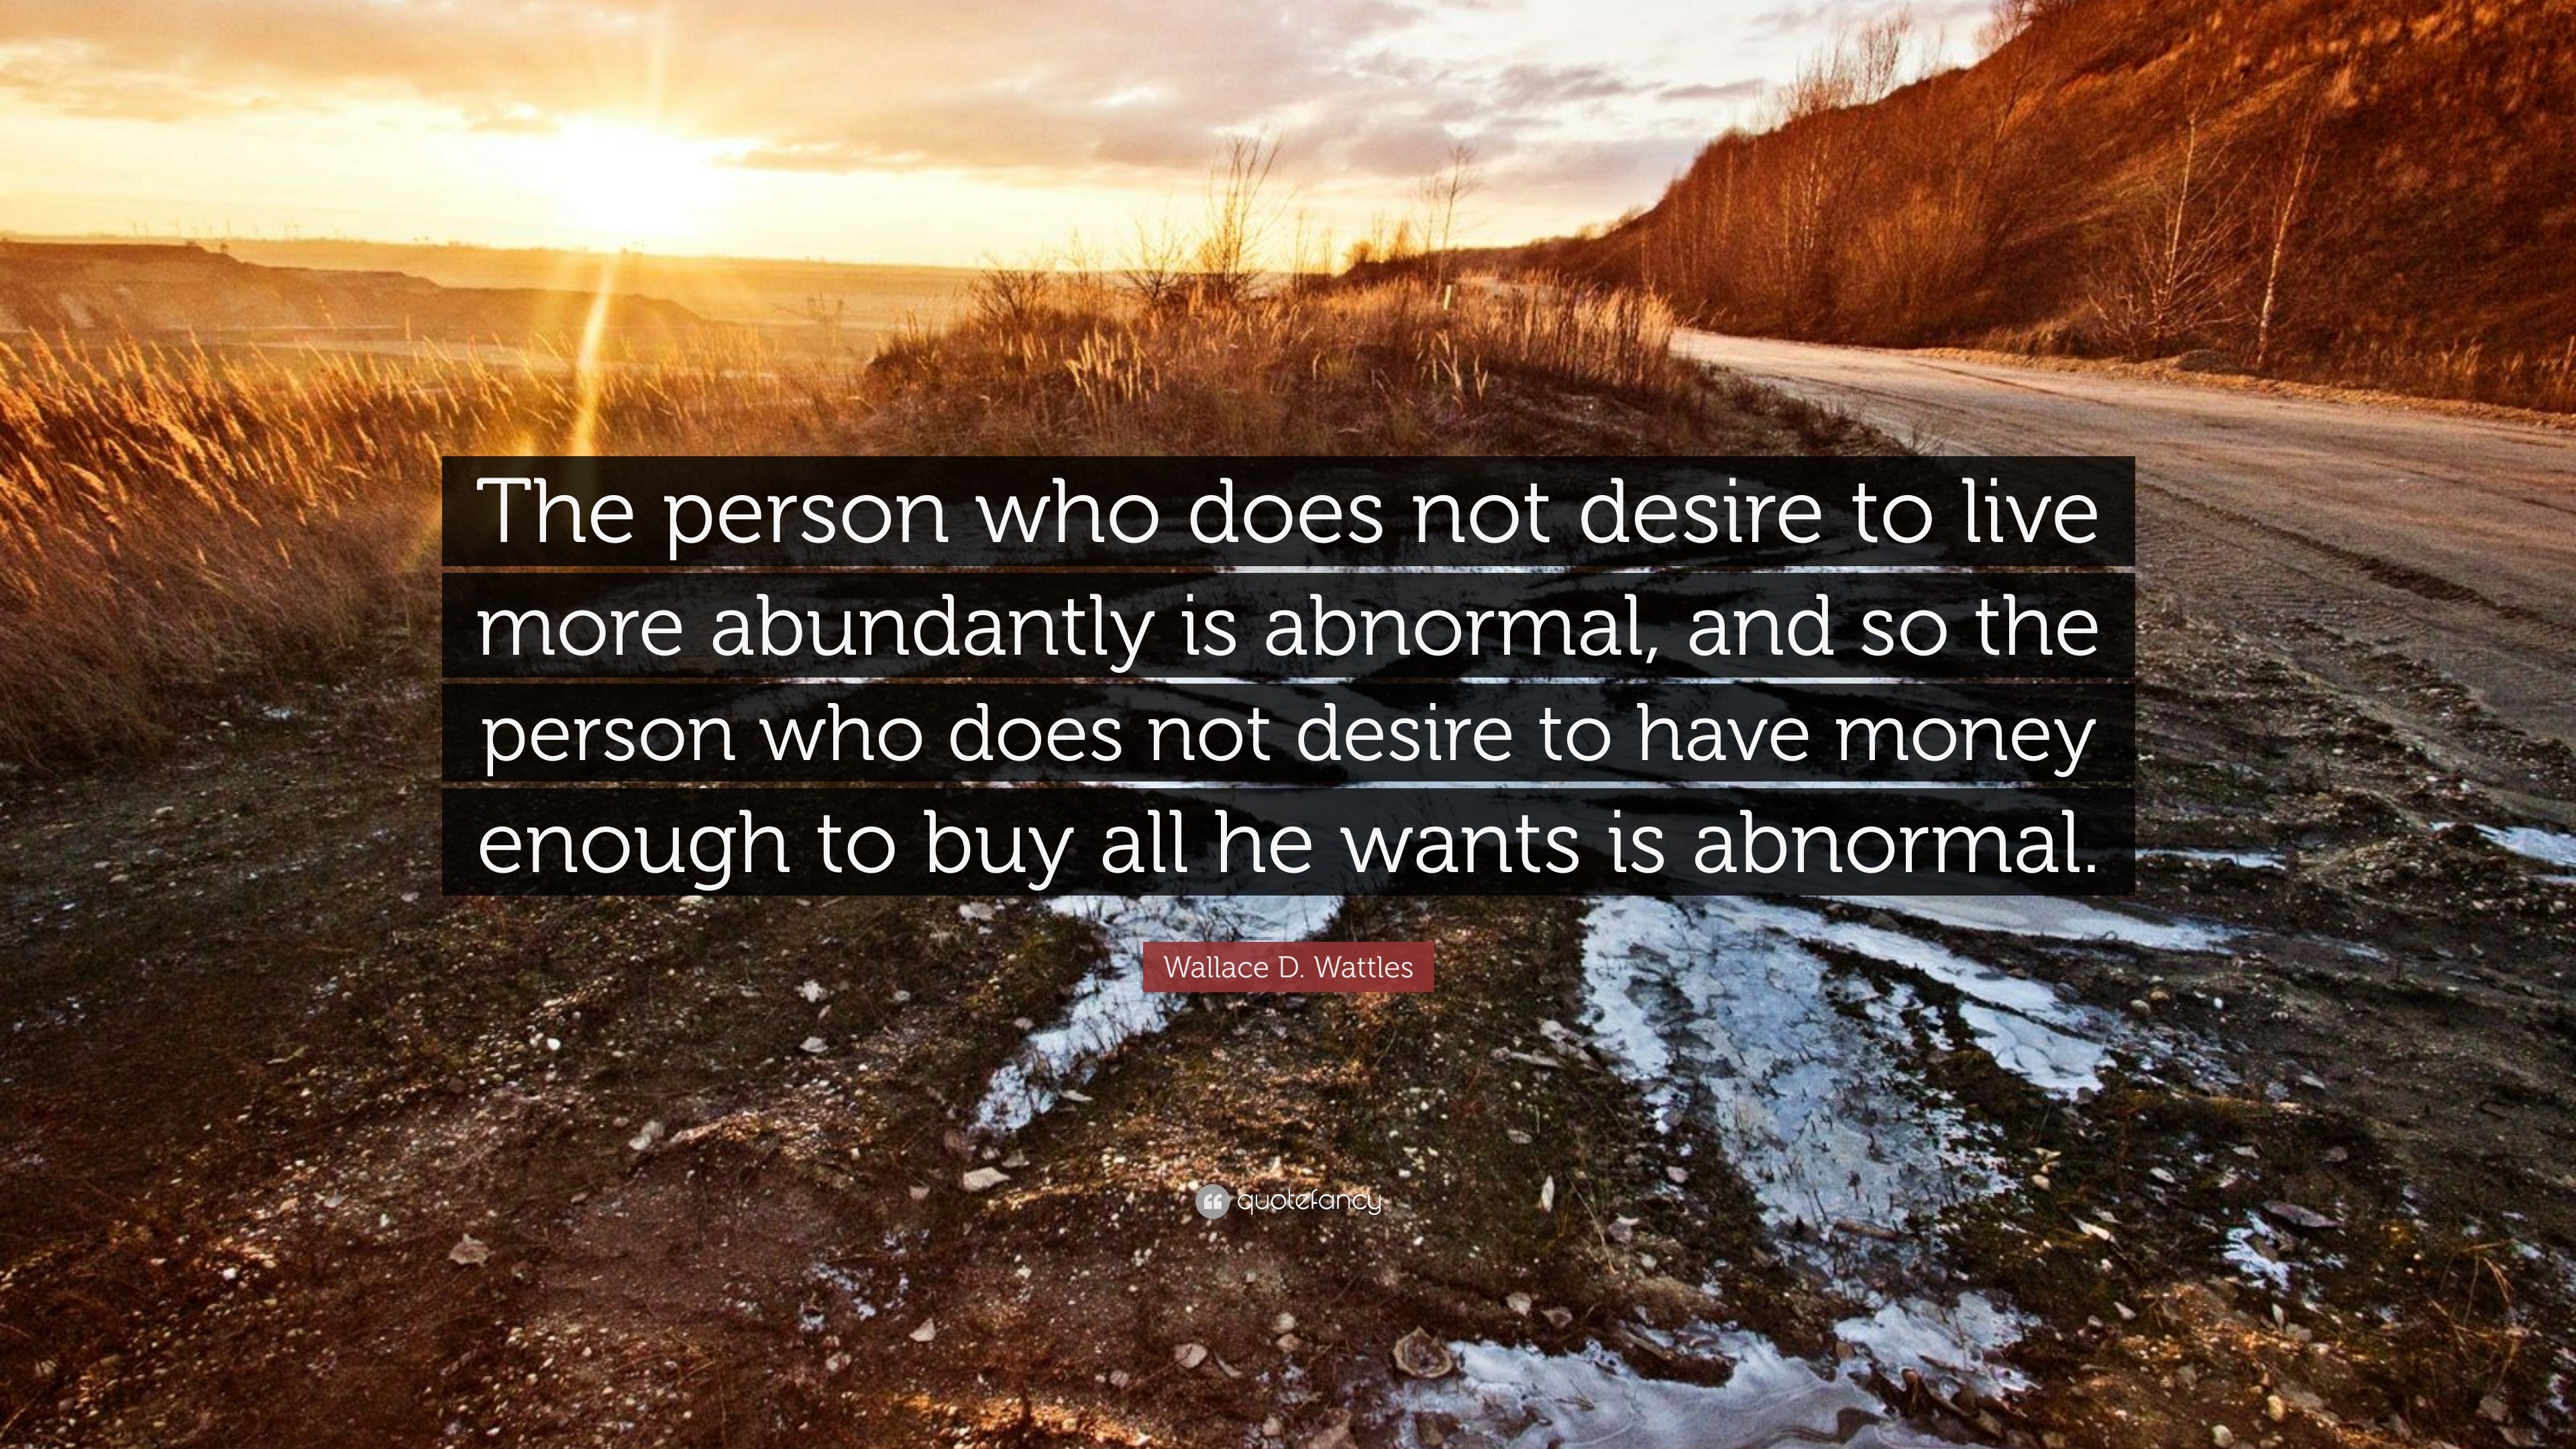 Wallace D Wattles Quote “The person who does not desire to live more